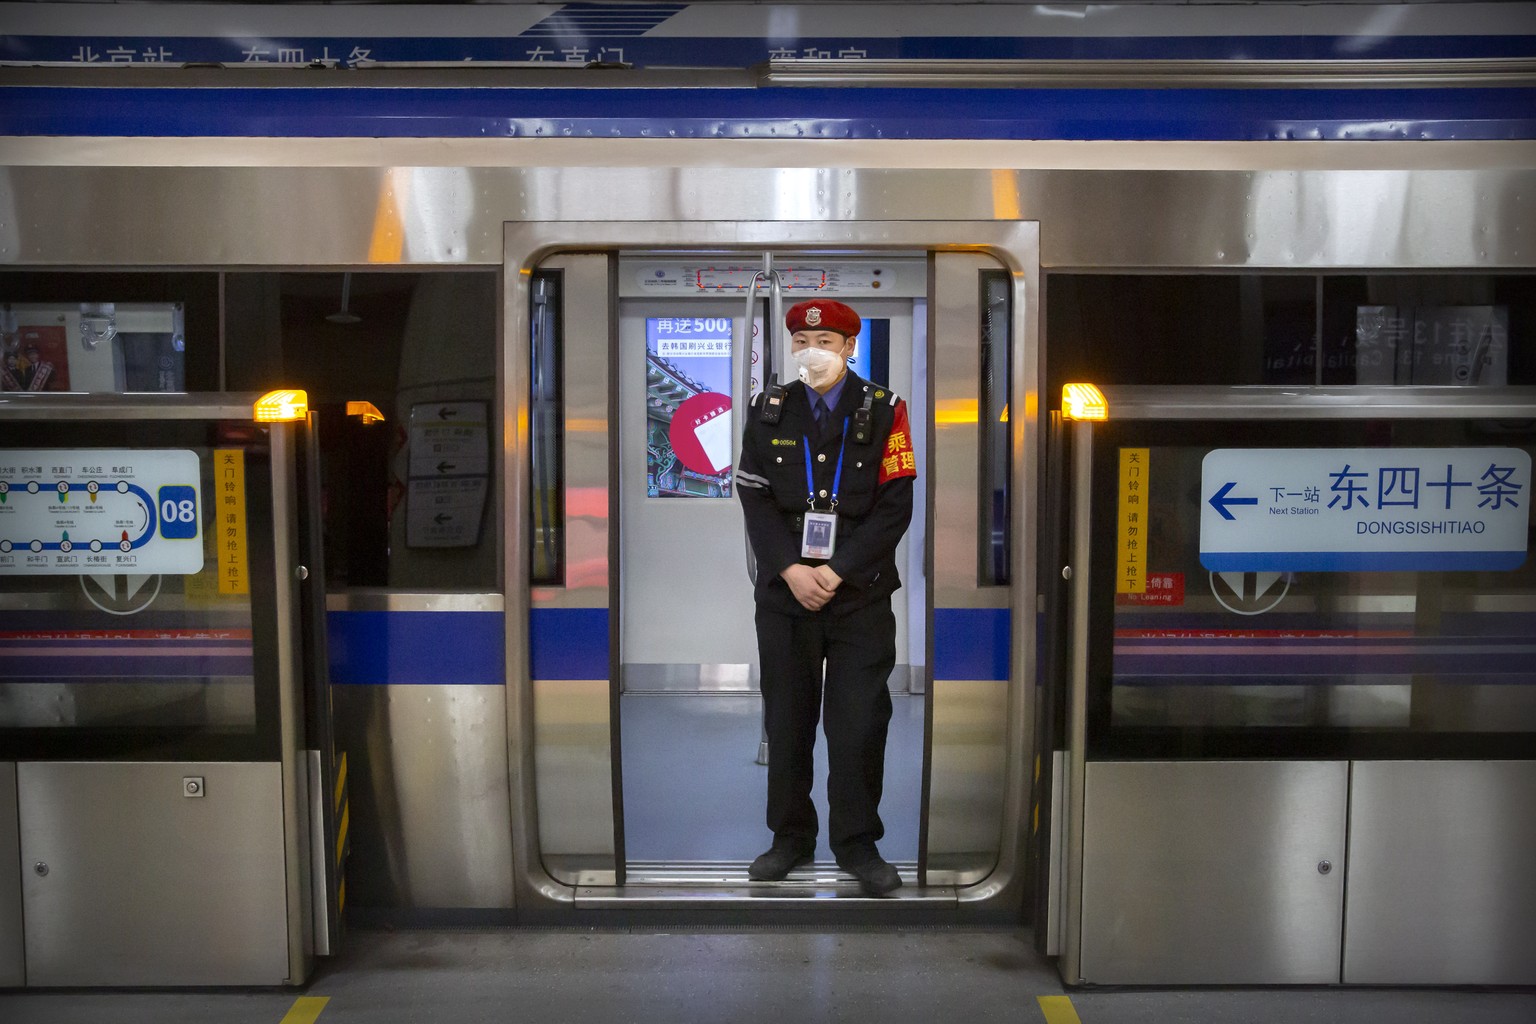 FILE - In this Feb. 3, 2020, file photo, a security officer wearing a face mask stands on a subway train in Beijing. Health authorities are preparing for a possible pandemic as they work to contain a  ...